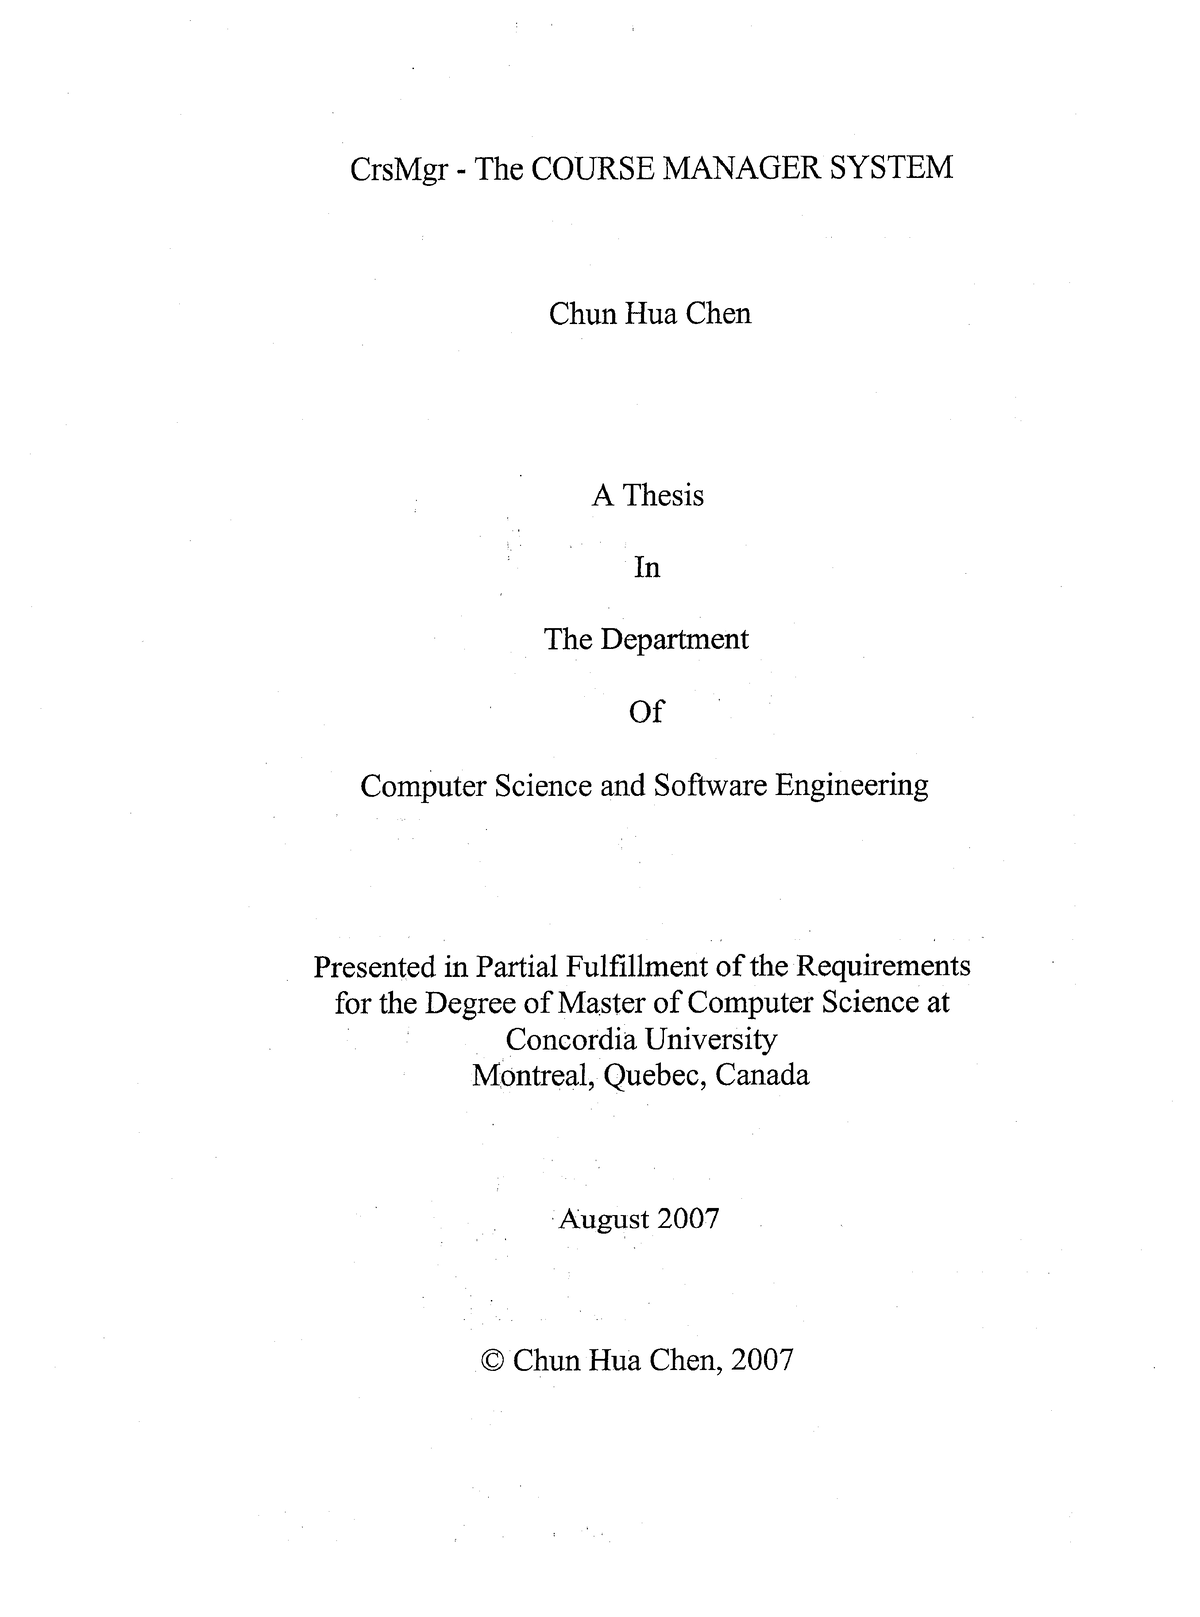 thesis submission concordia